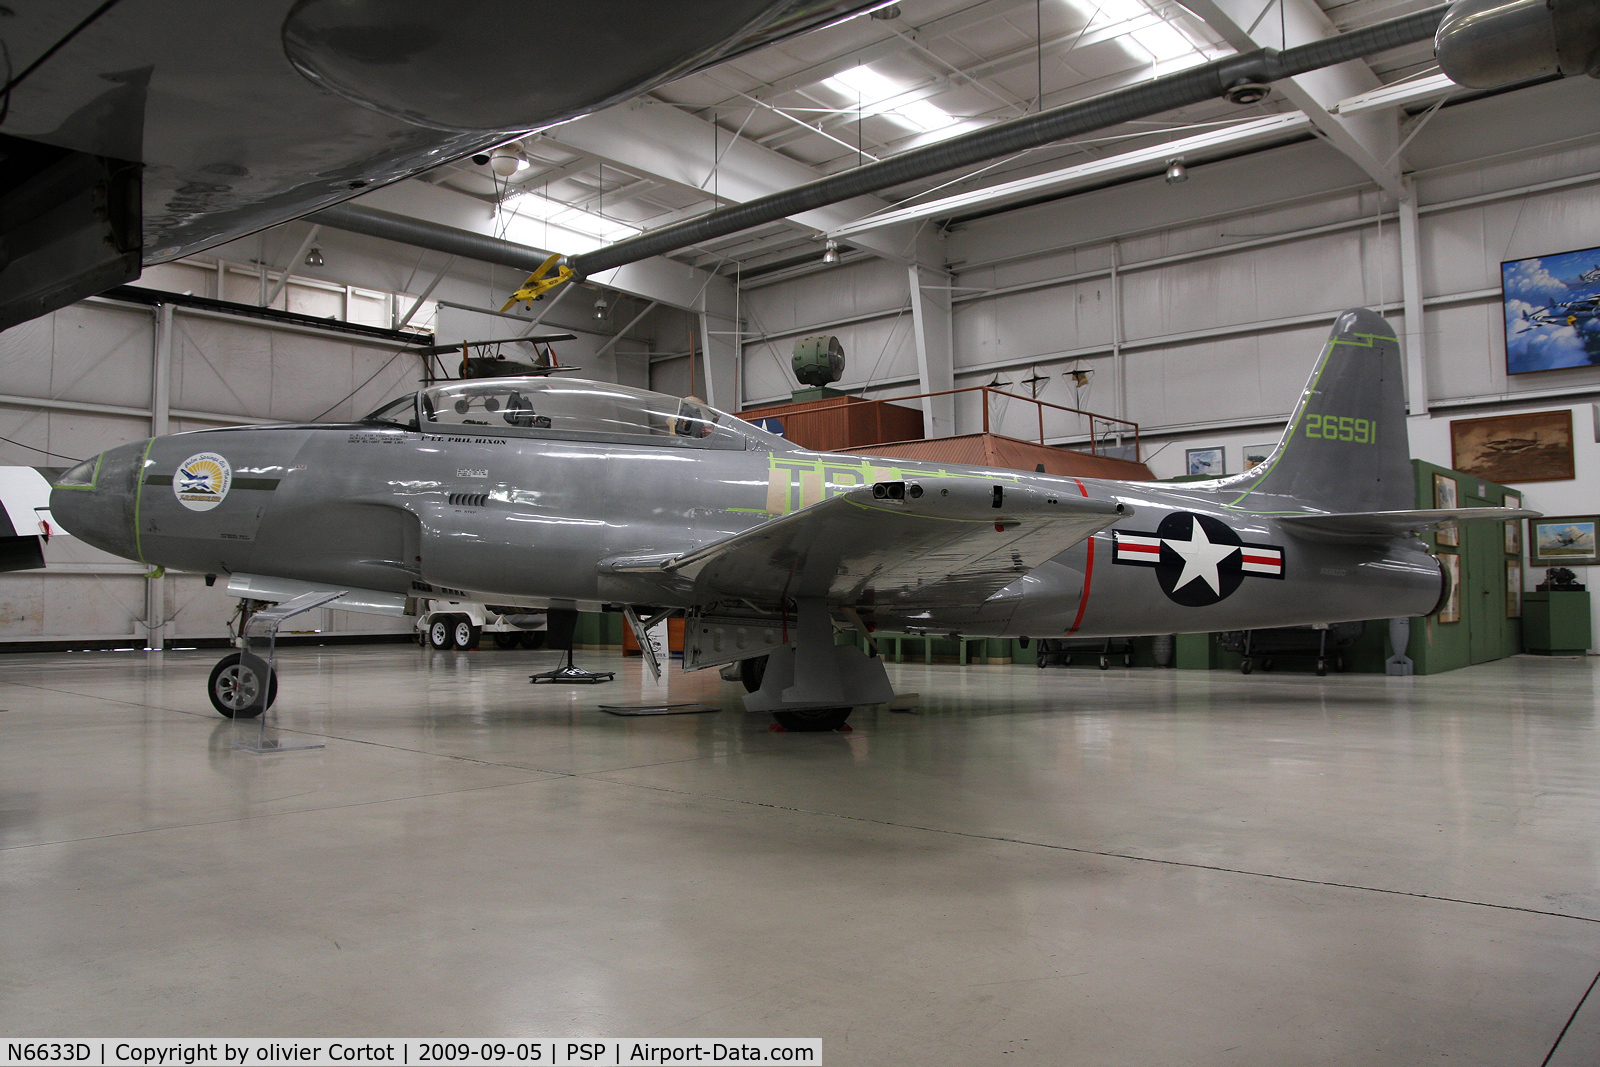 N6633D, Lockheed T-33B (TV-2 Seastar) C/N Not found 126591/N6633D, Paint job at the Palm Springs air museum